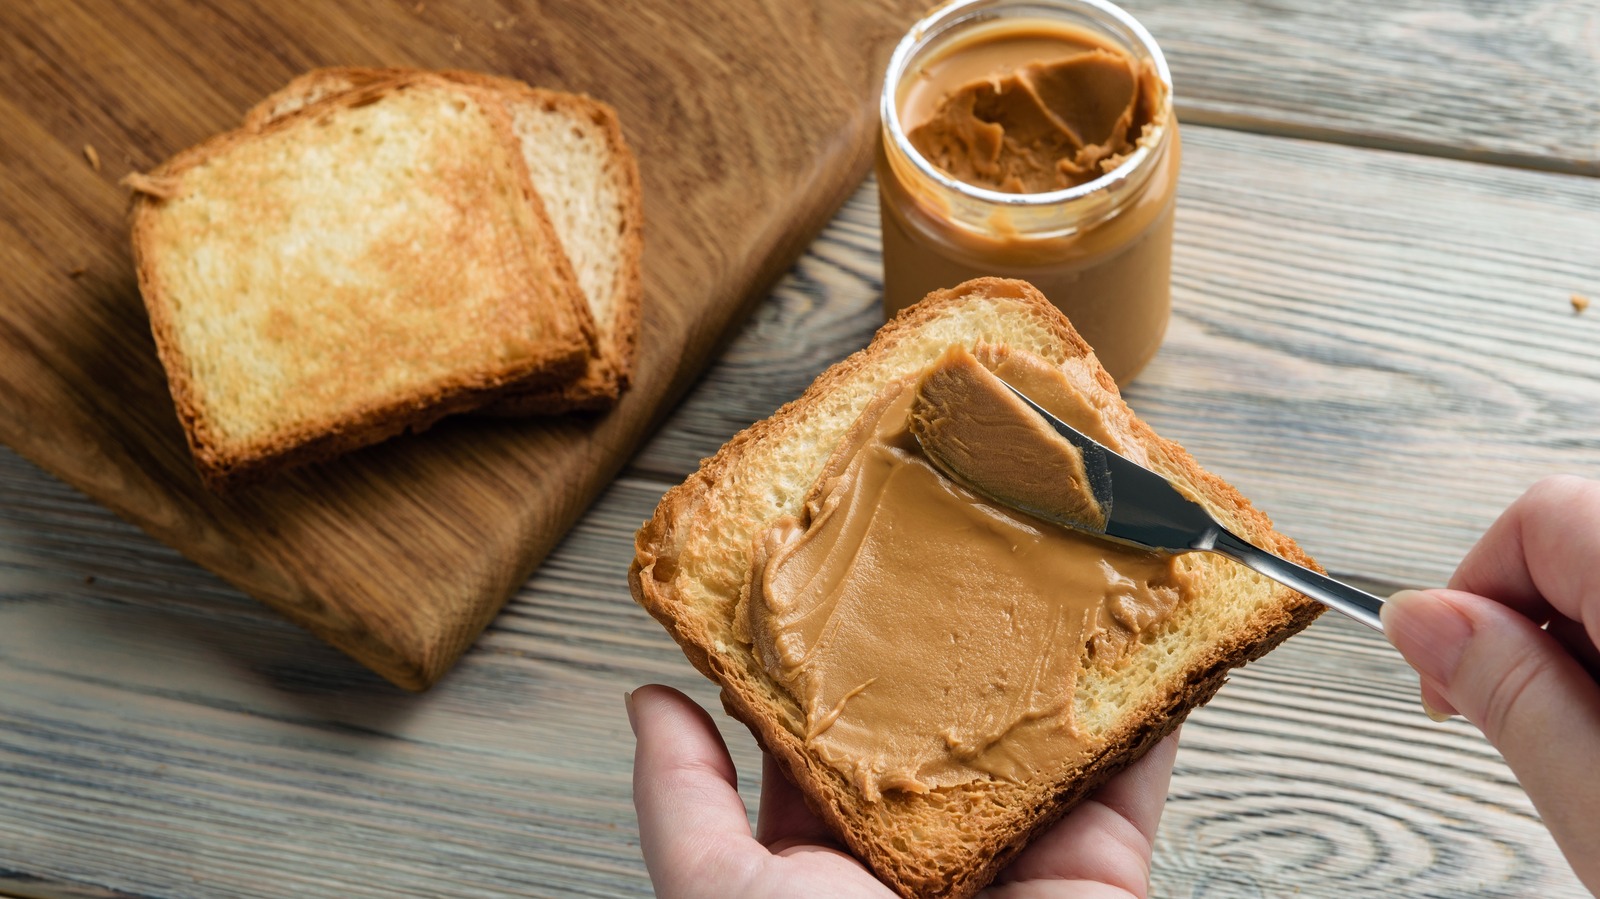 What Happened To Peanut Butter Pump After Shark Tank?